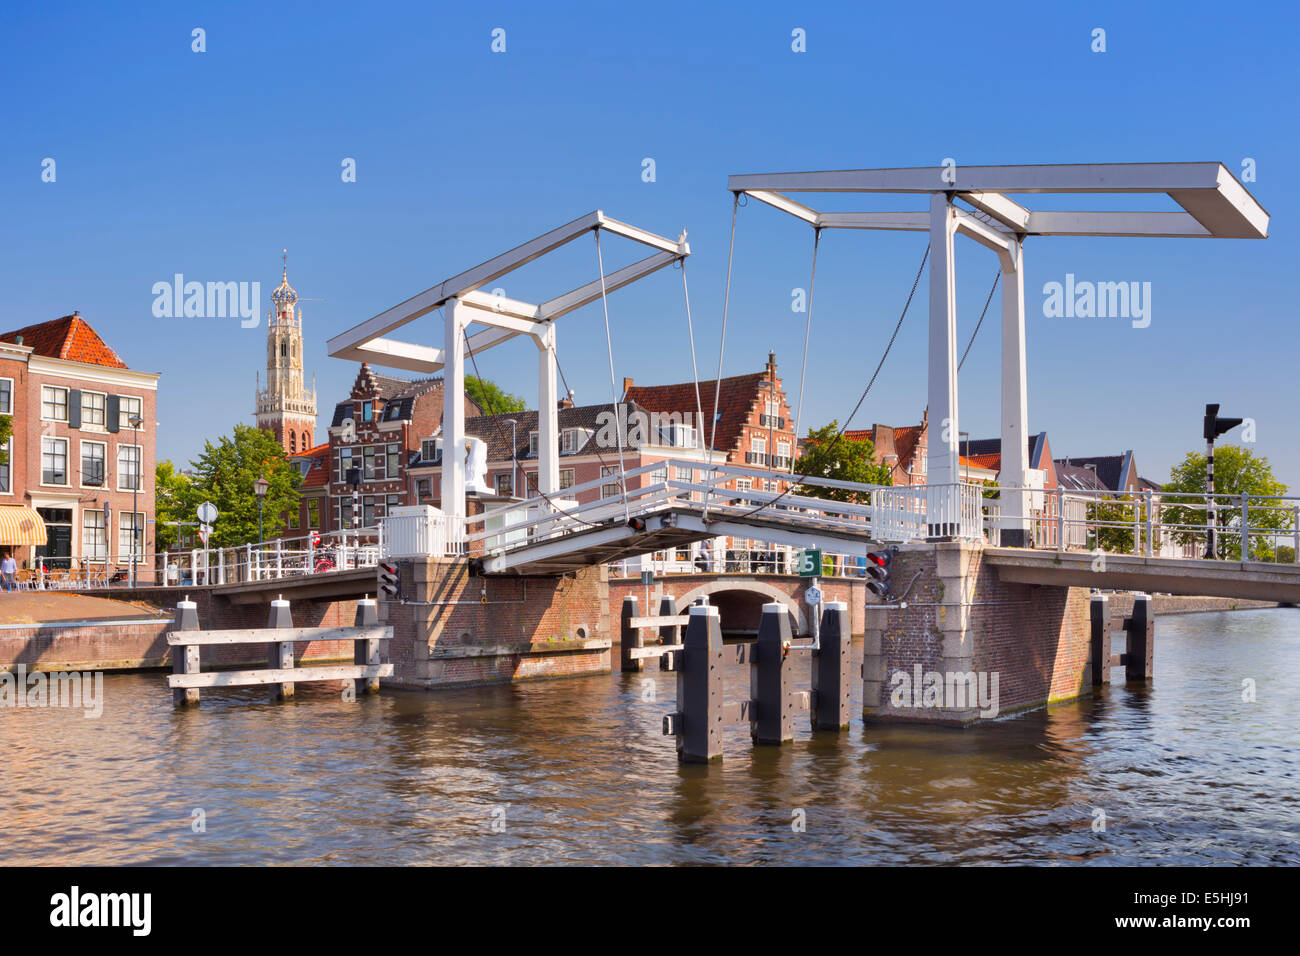 Draw bridge over the river Spaarne in the city of Haarlem, The Netherlands Stock Photo